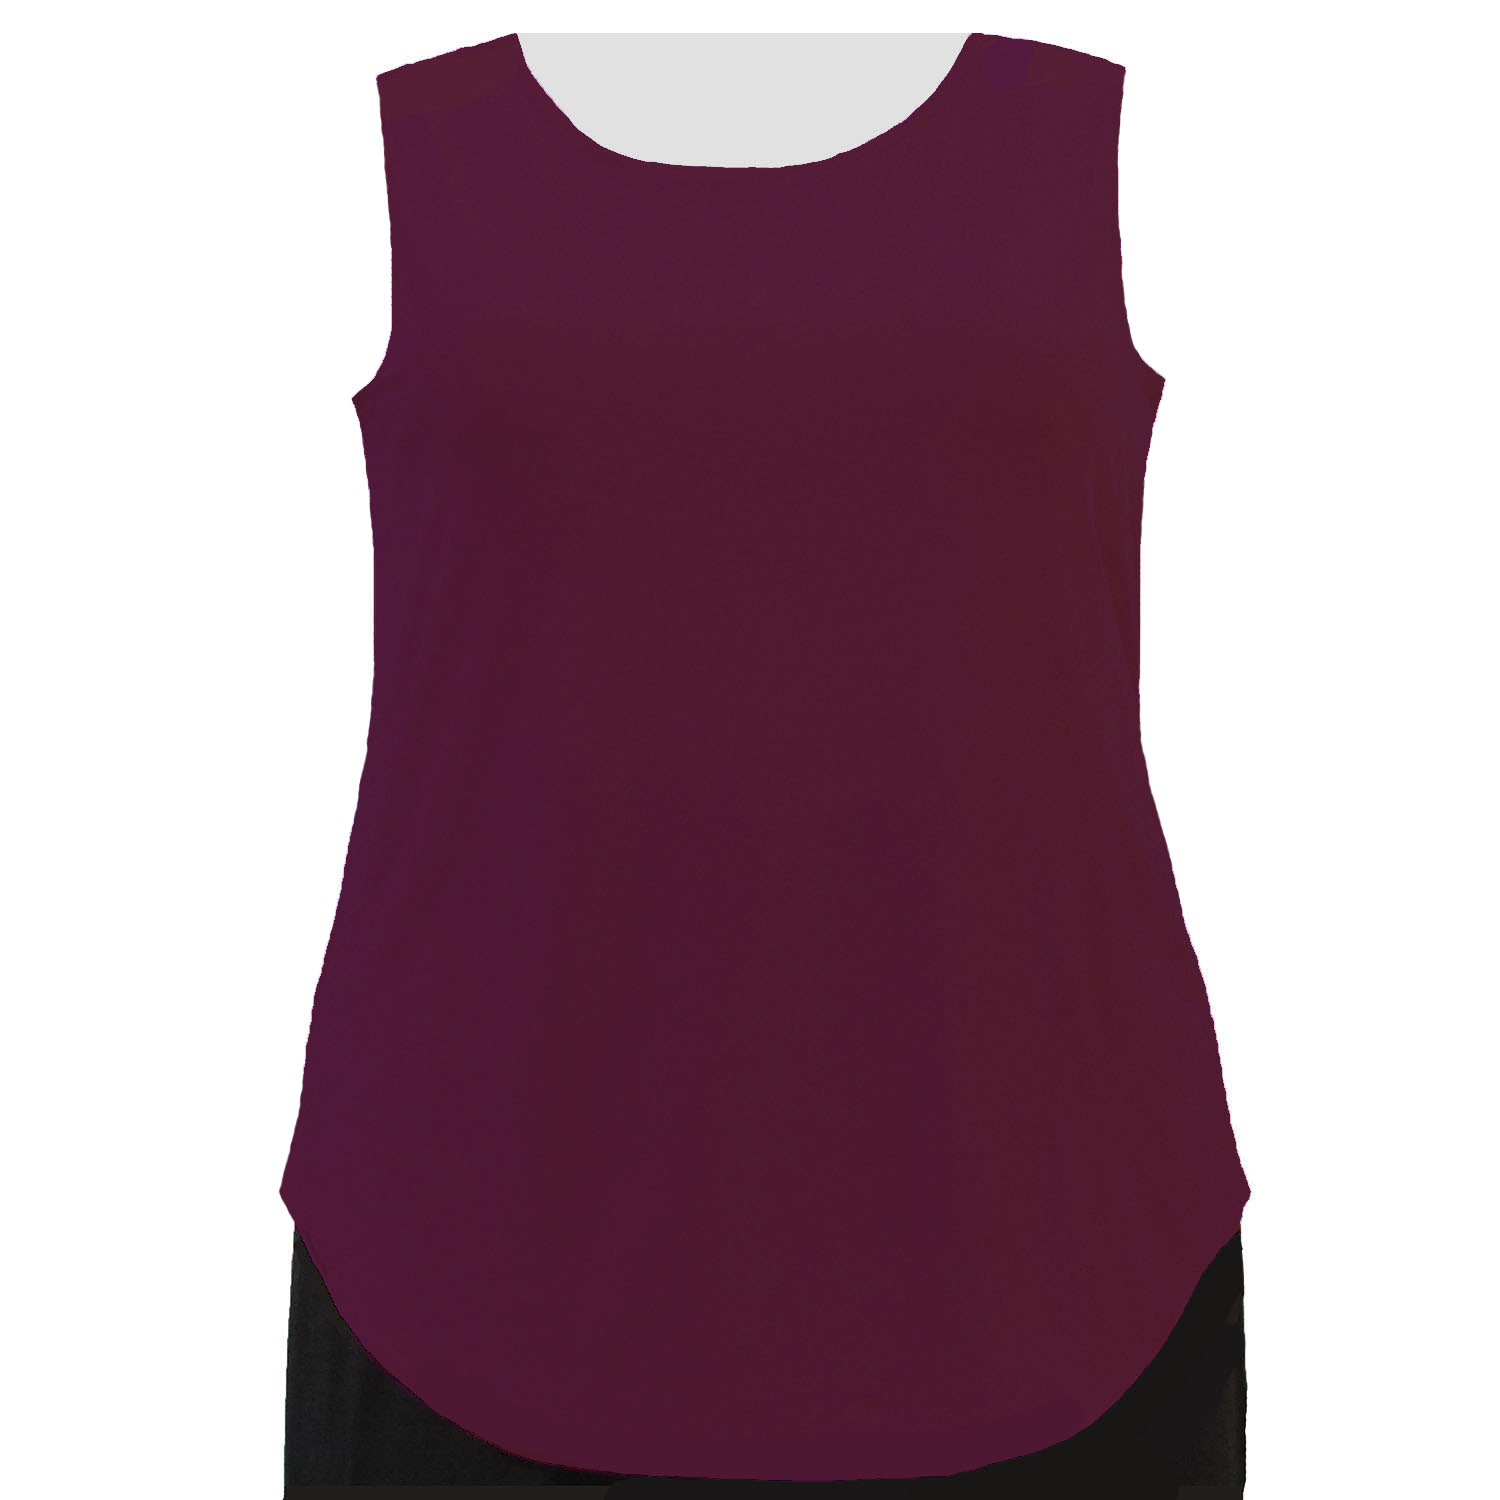 A Personal Touch Women's Plus Size Wine Tank Top 